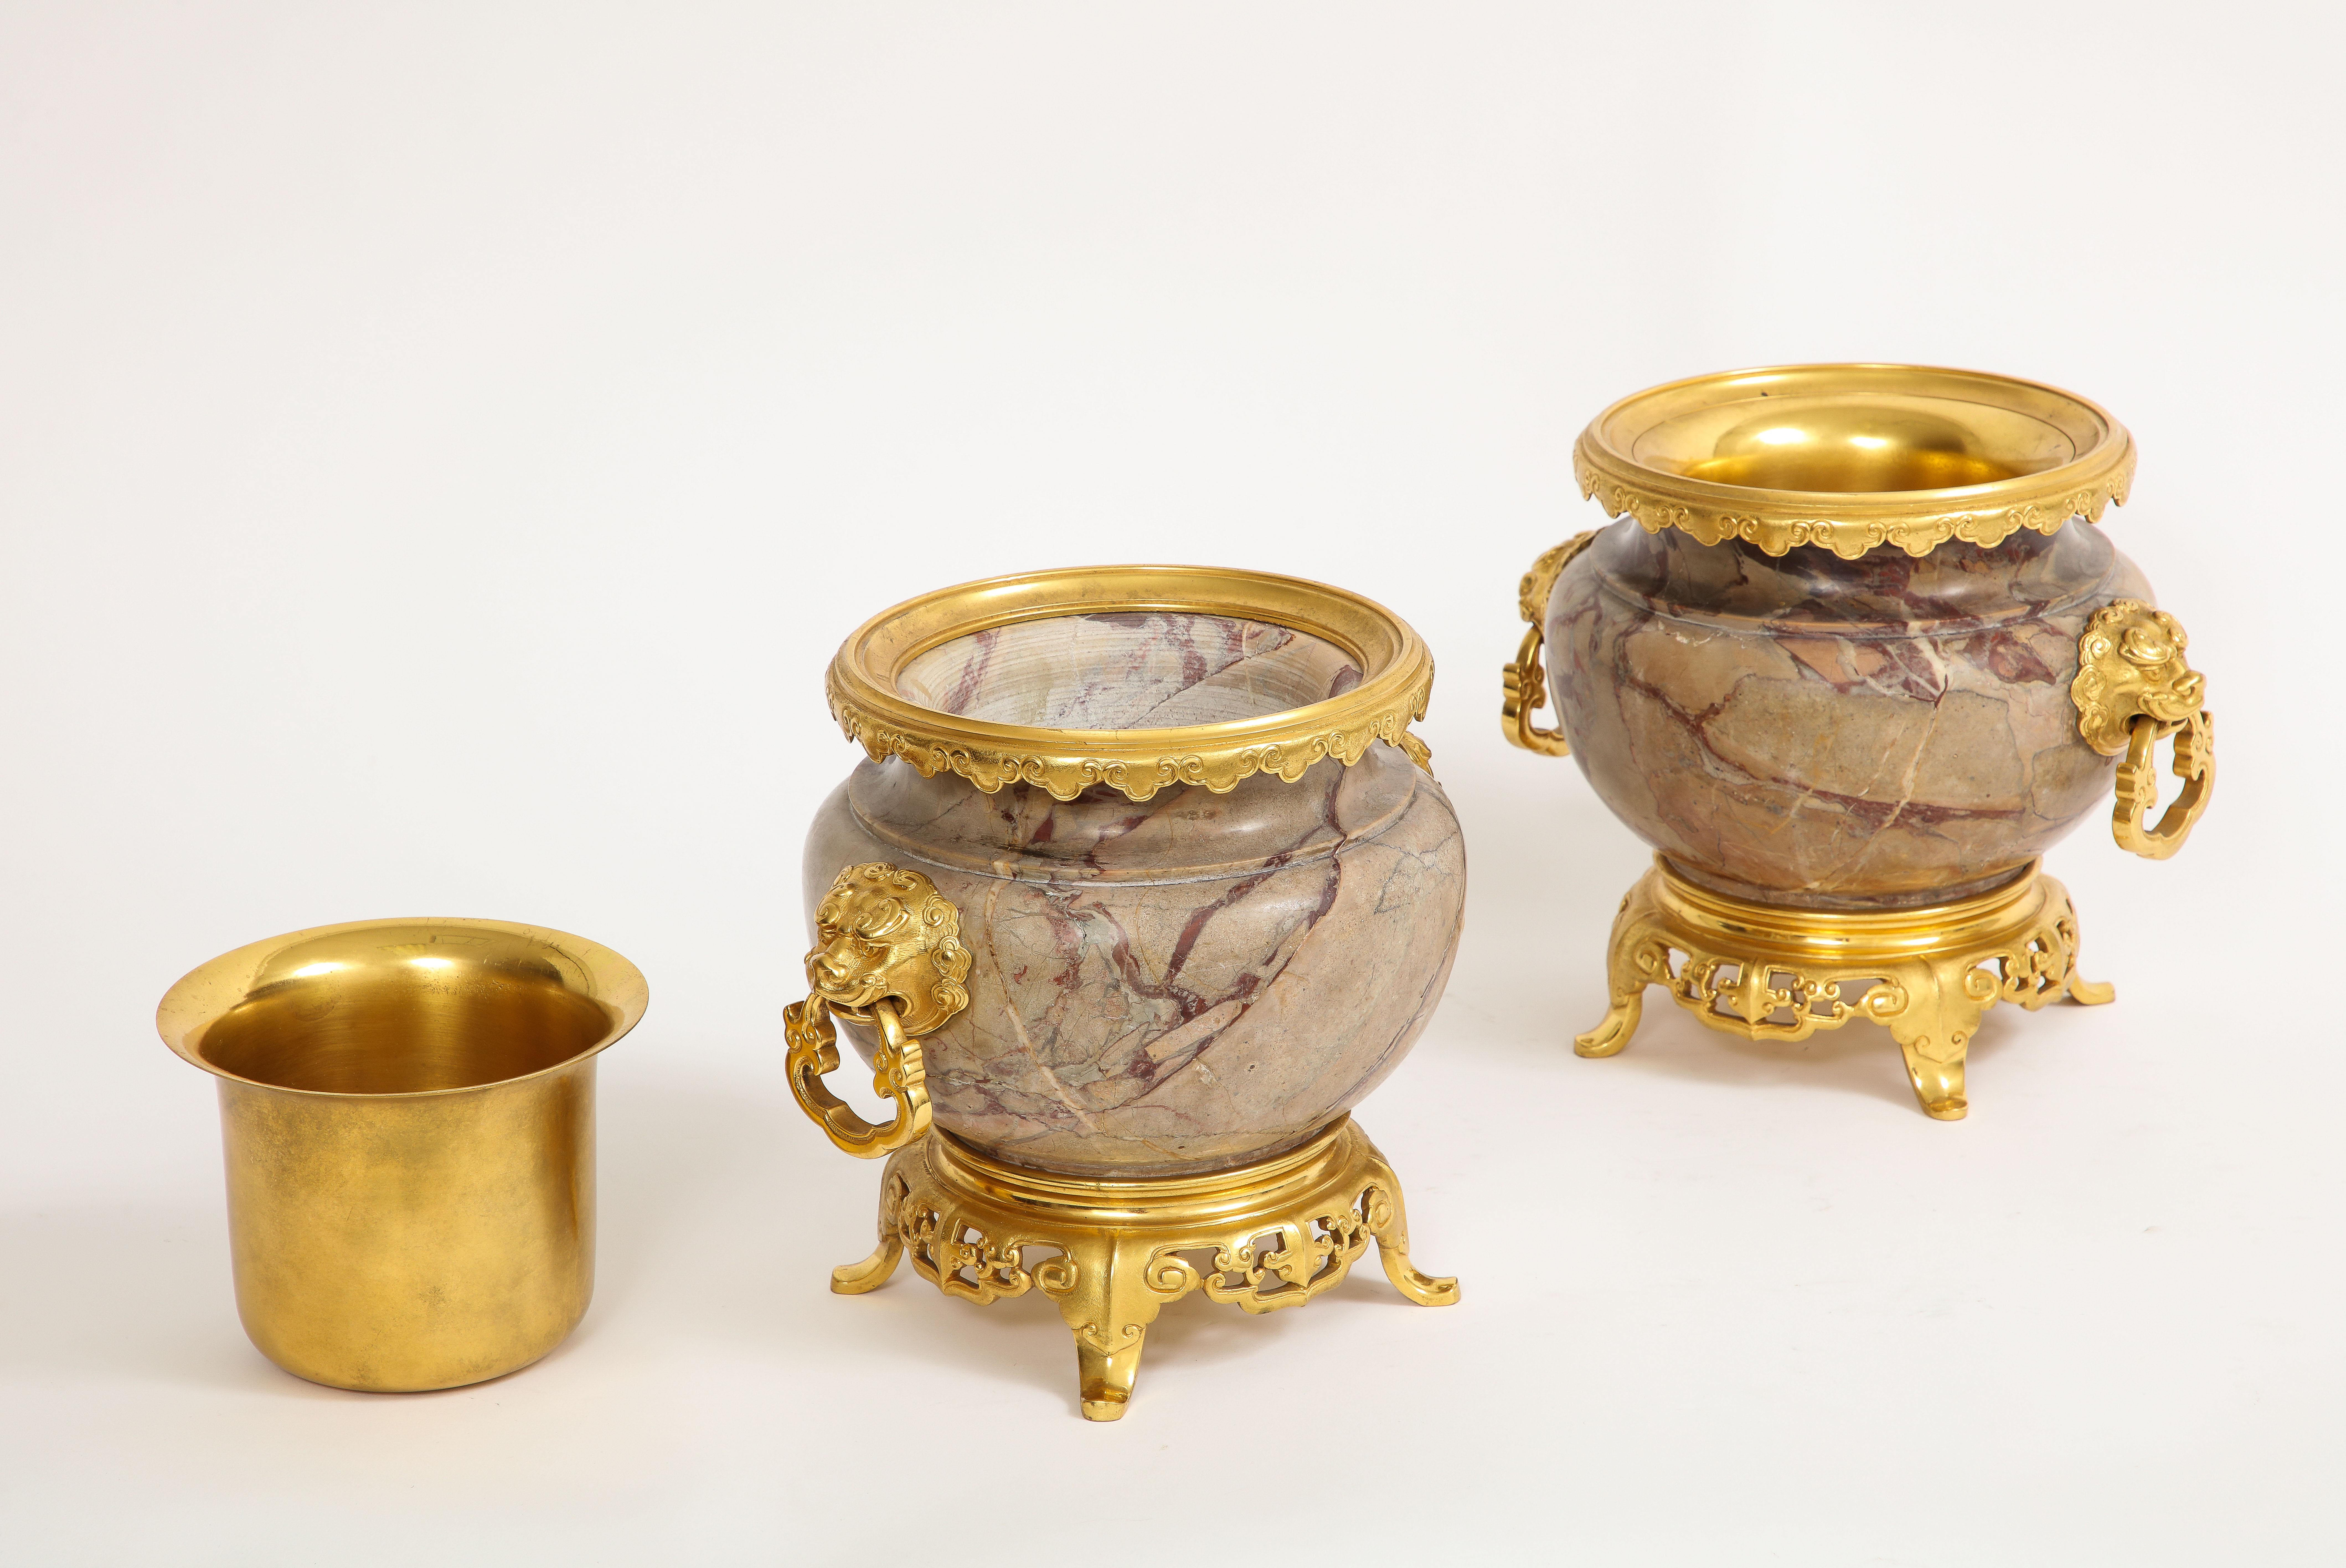 Pair of 19th Century French Ormolu Mounted Marble Centerpieces, H. Journet & Cie In Good Condition For Sale In New York, NY